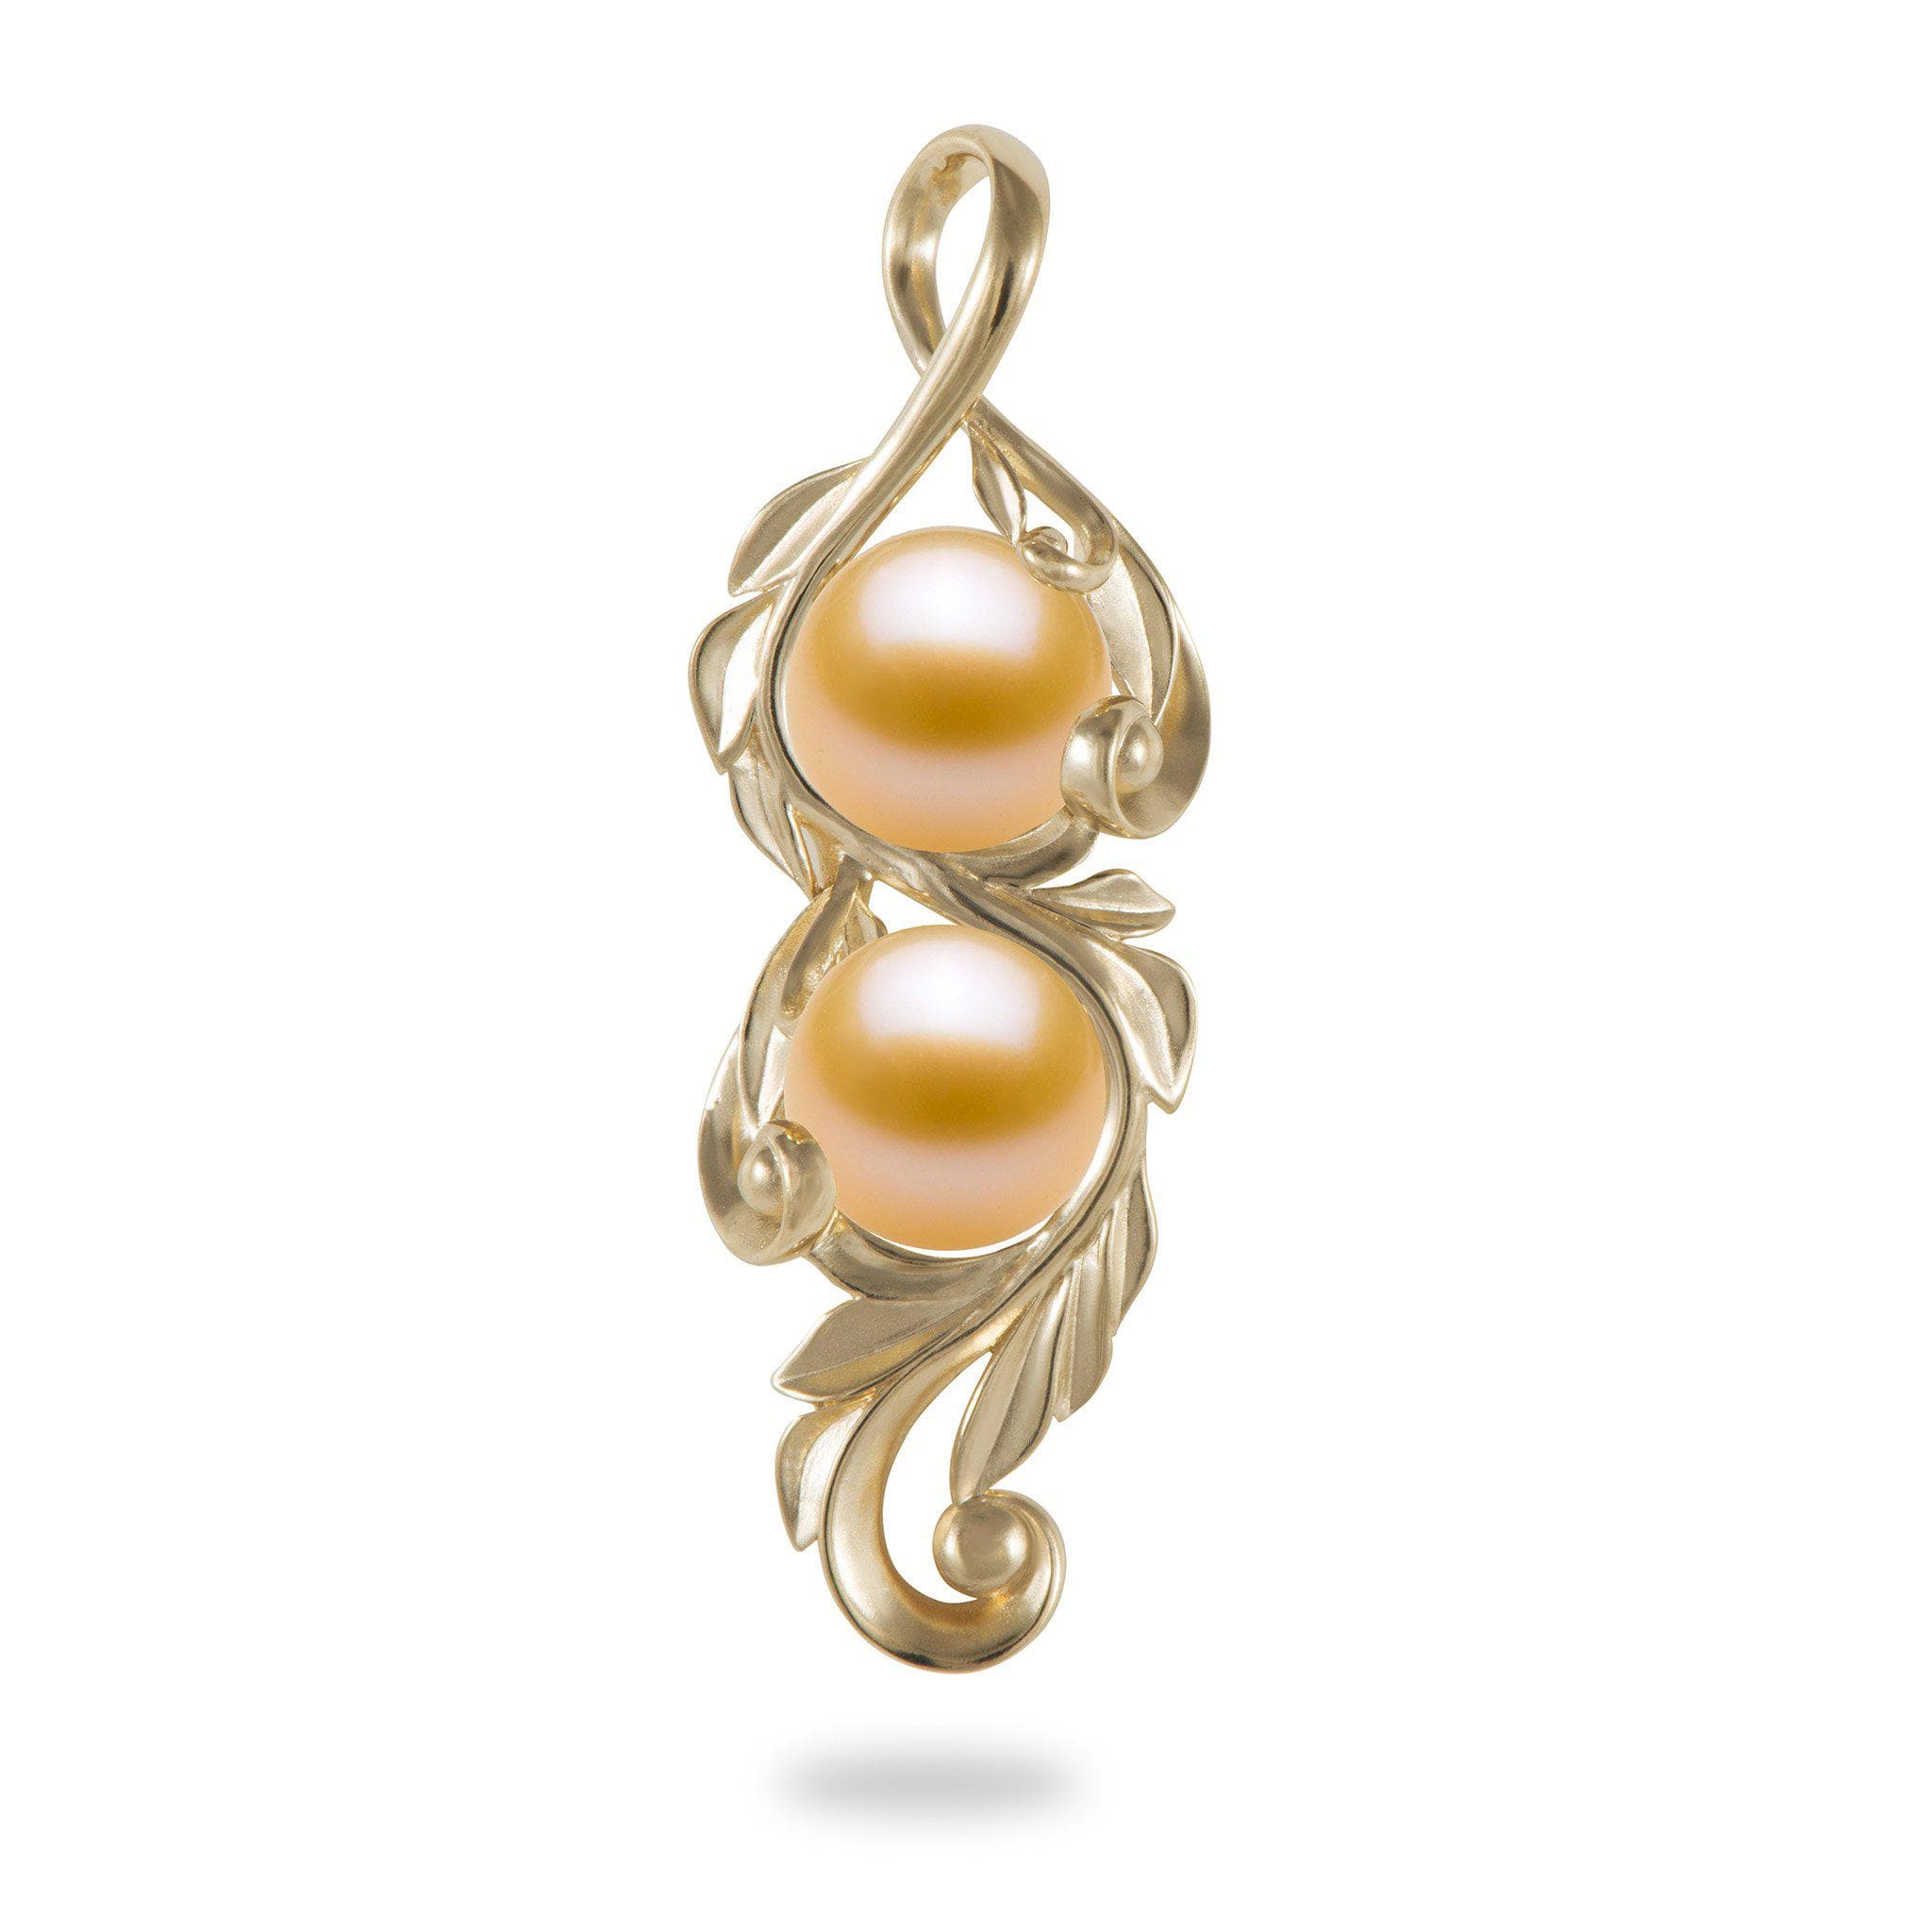 Maile Scroll Pendant Mounting in 14K Yellow Gold with Peach Pearl - Maui Divers Jewelry